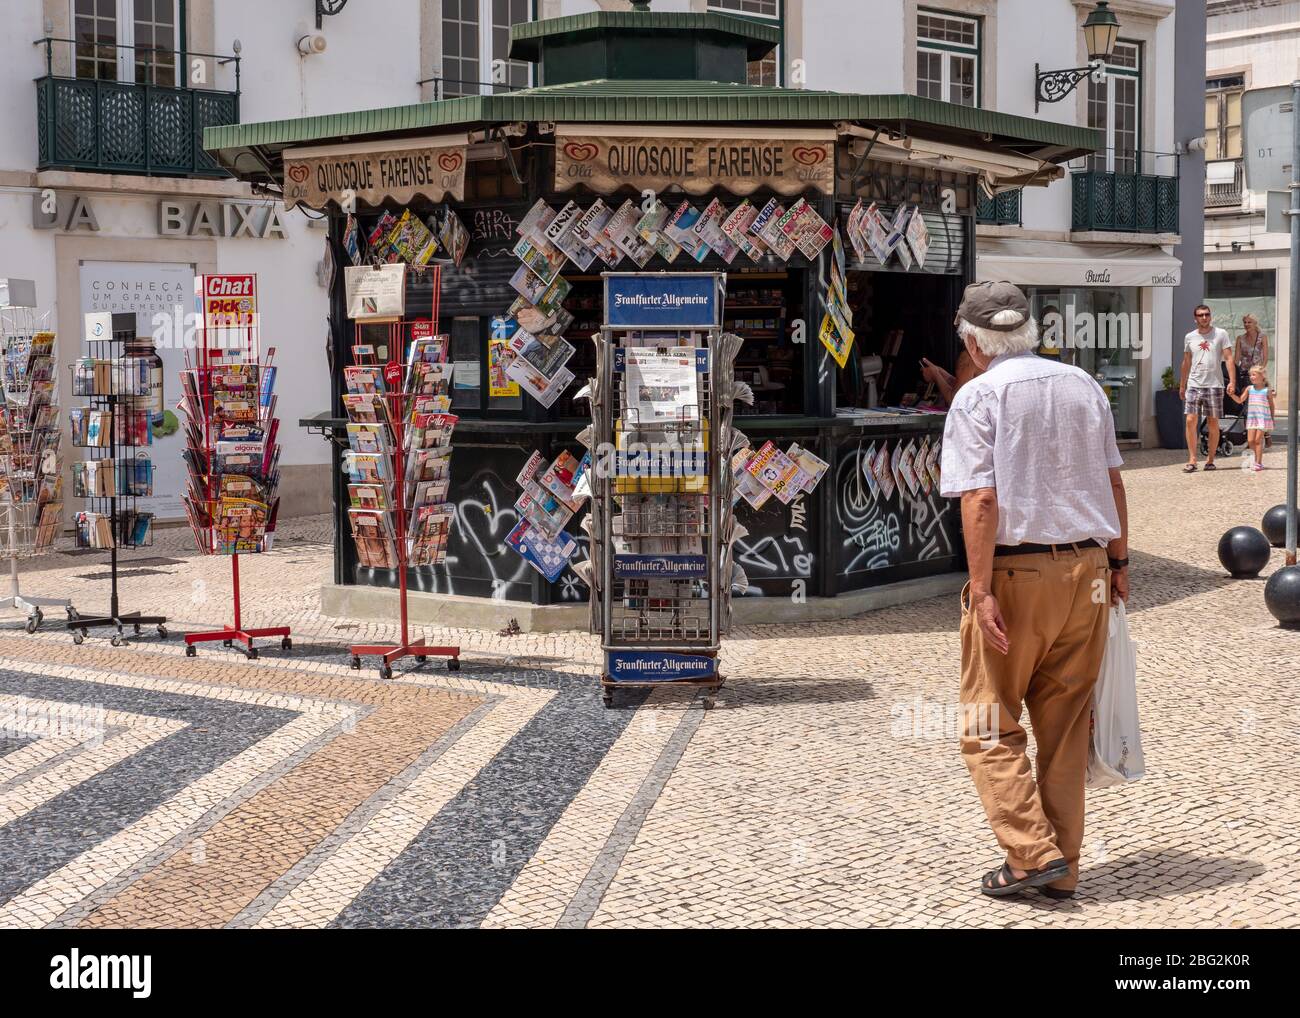 Portuguese News Kiosk. An elderly local approaches a typical news kiosk in the Algarve district of central Faro. Stock Photo